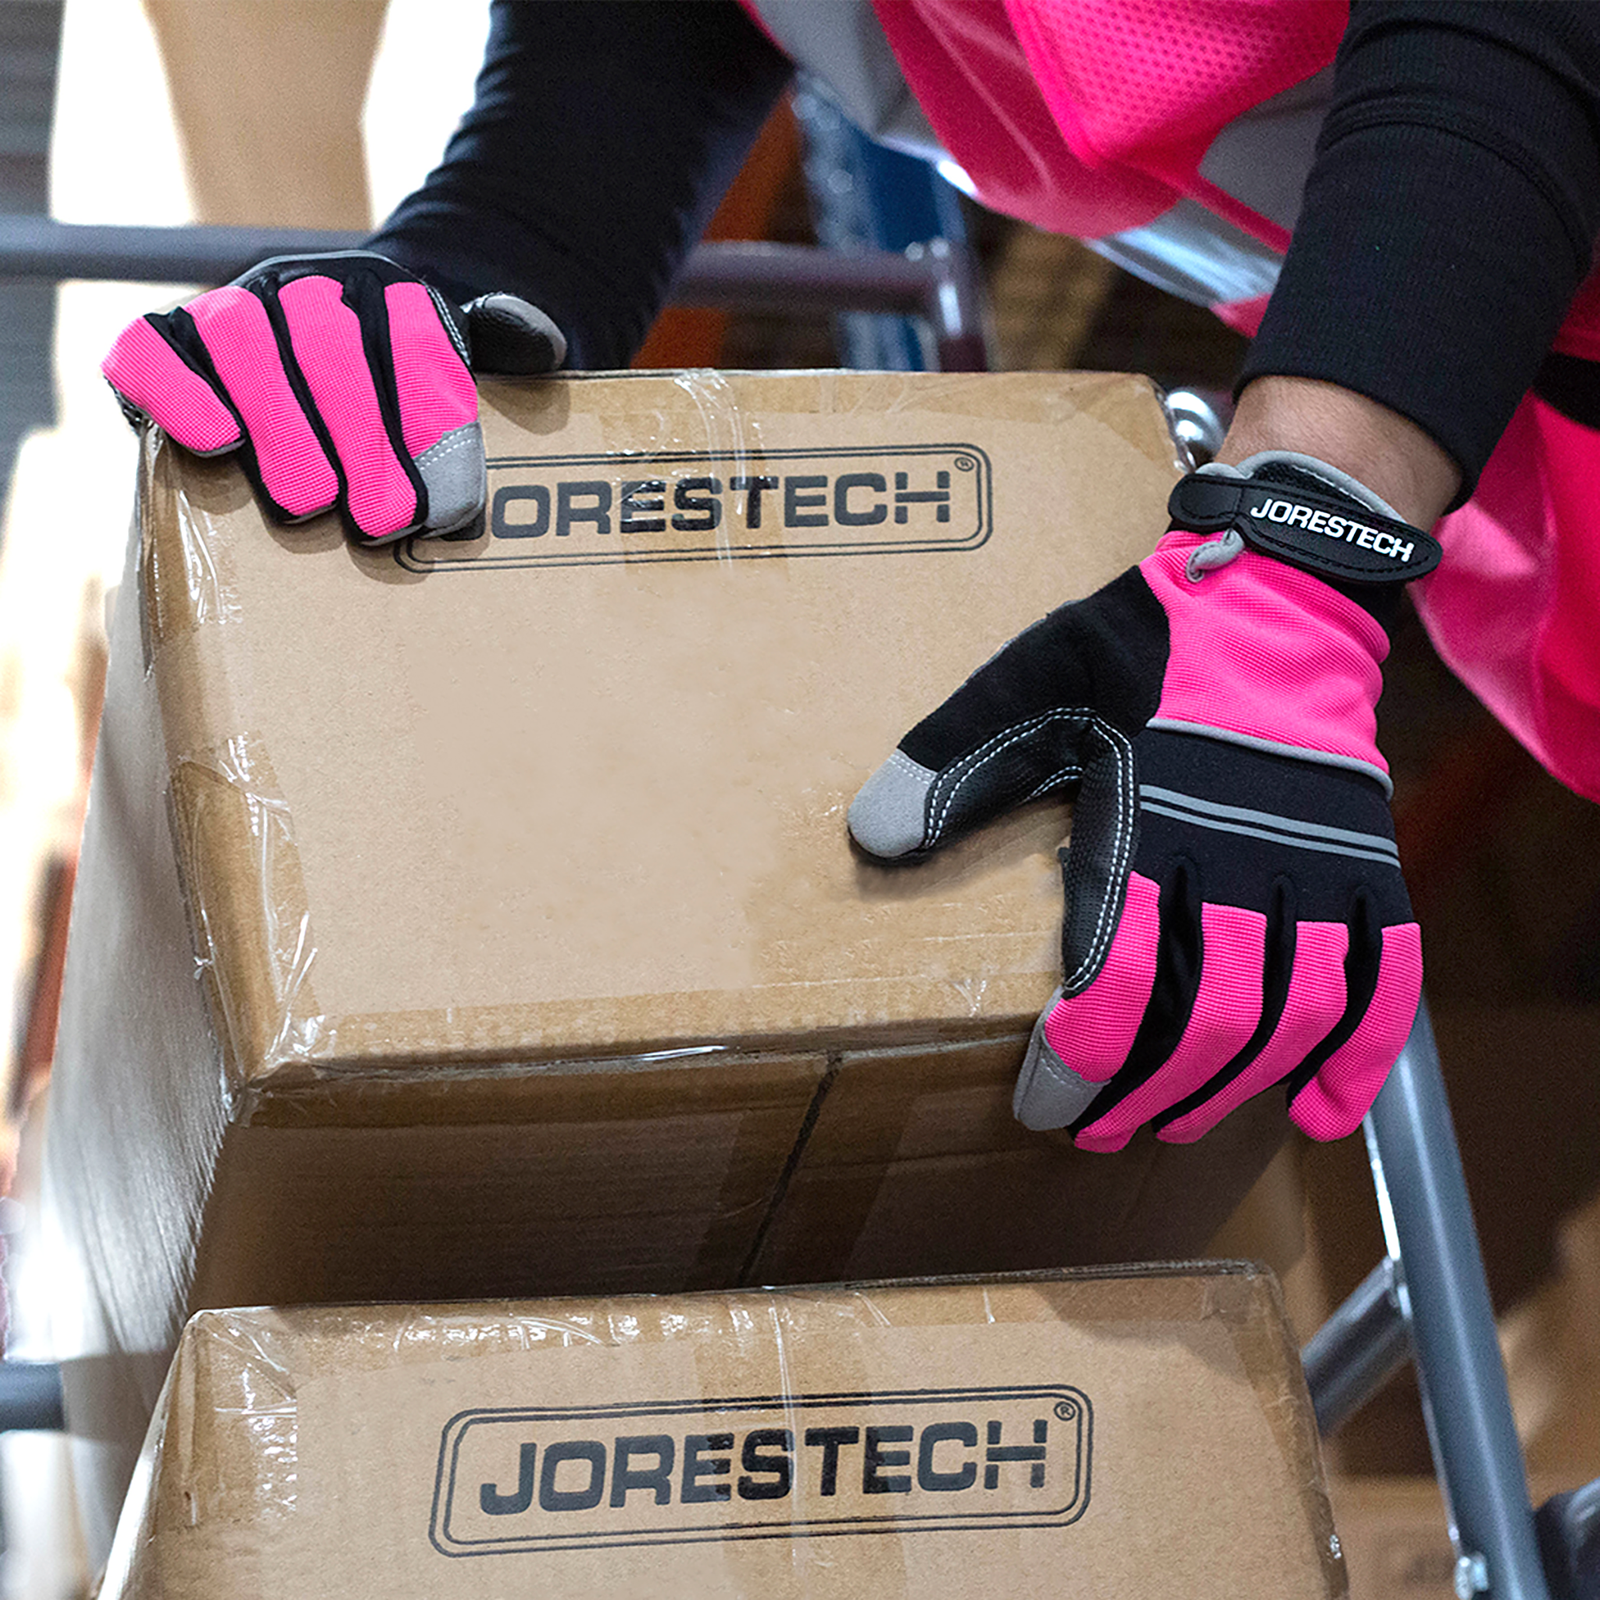 Worker wearing the pink JORESTECH safety work gloves and a pink safety vest . This person is in a ladder lifting heavy brown card boxes